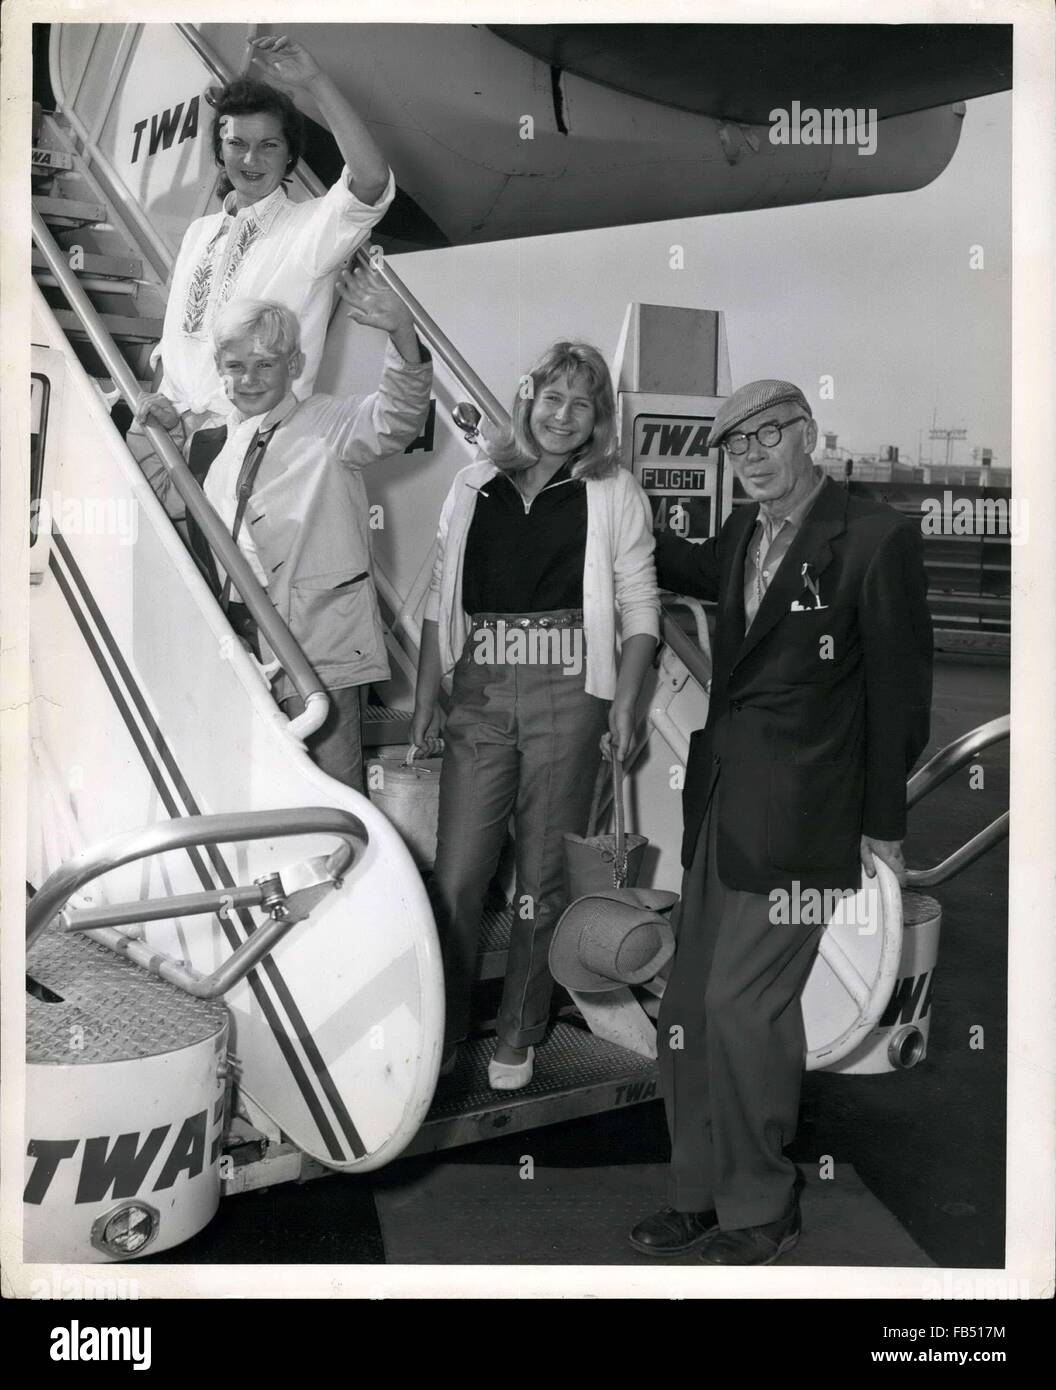 1973 - N.Y. International Airport, August 21:Author Henry Miller, of ''Tropic of Cancer'' and ''Tropic of Capricorn'' fame, and his handsome family, Tony, 11, Val, 14, and wife, prepare to a board a TWA Jetliner to San Francisco. En Route to his famous home, Big Sur. Miler, who is returning home after a four month tour of the continent, told reporters at the airport that the doesn't expect, Nor does he really care, If his controversial votes will ever pass U.S. Postal approval as ''Lady Chatterley's Lover'' did recently. He said, ''My Books were written a quarter of a century ago and I don't Stock Photo